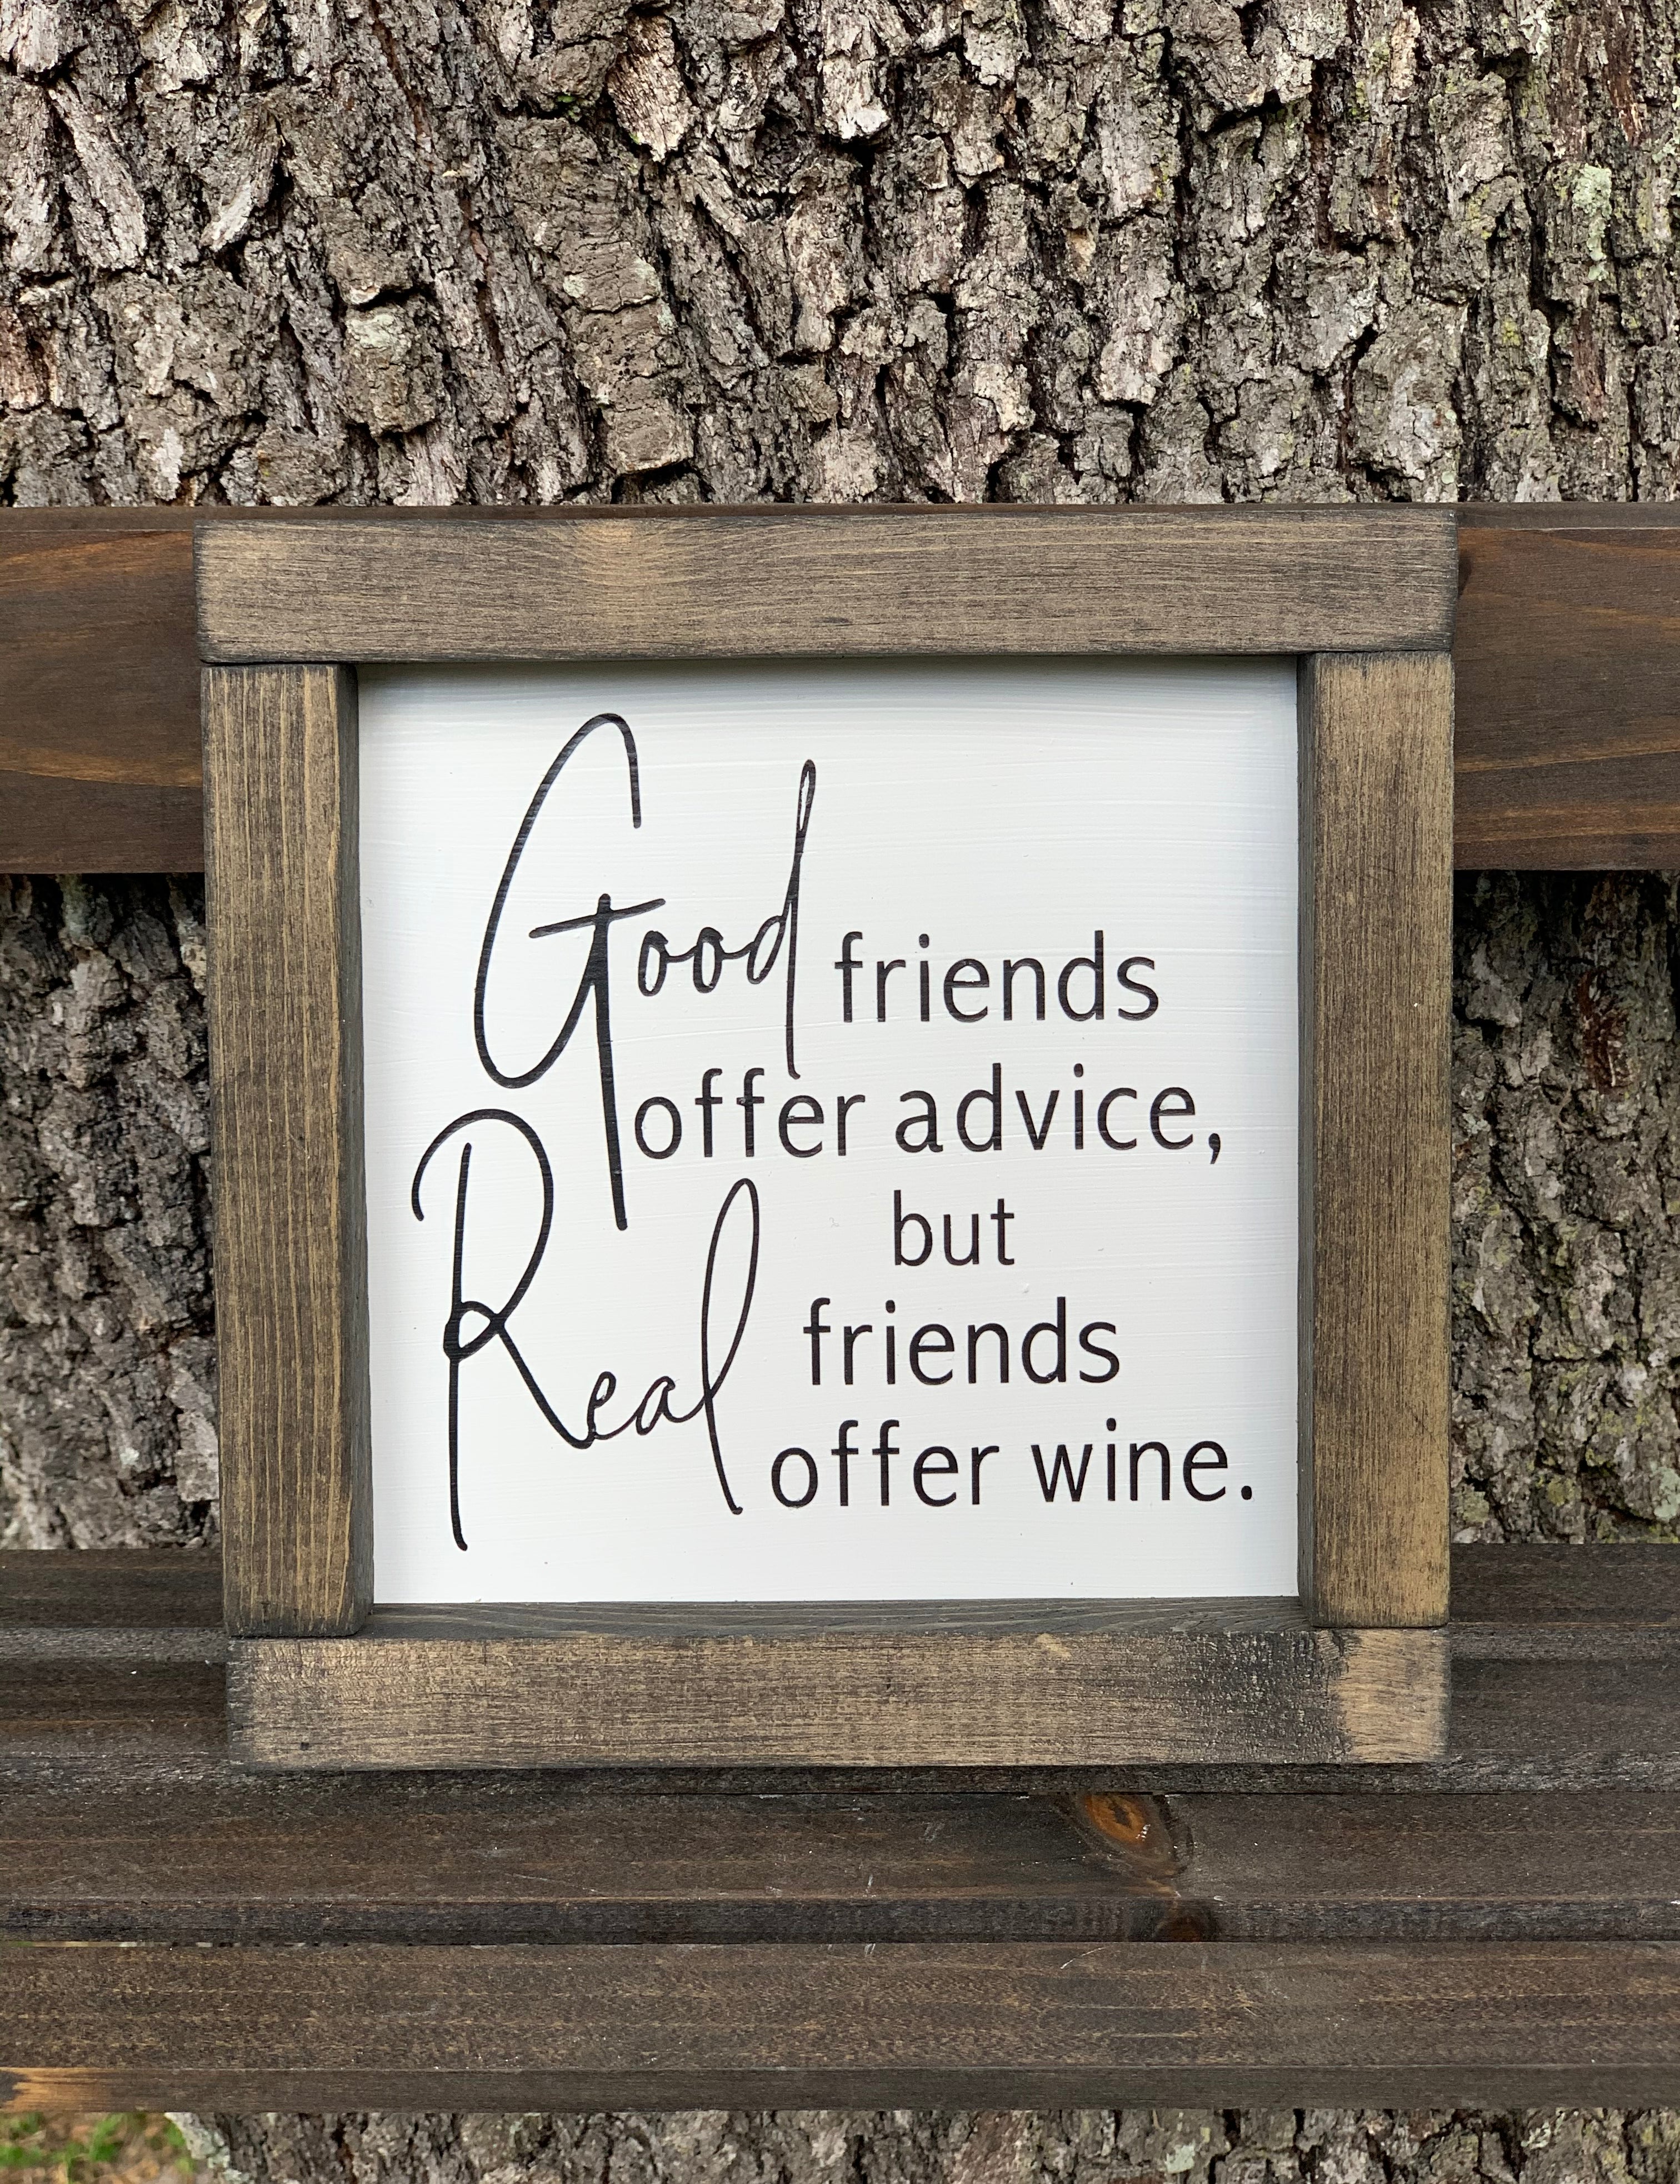 Good Friends Offer Advice, But Real Friends Offer Wine (Script Version) shows the sign sitting outside on a ladder.